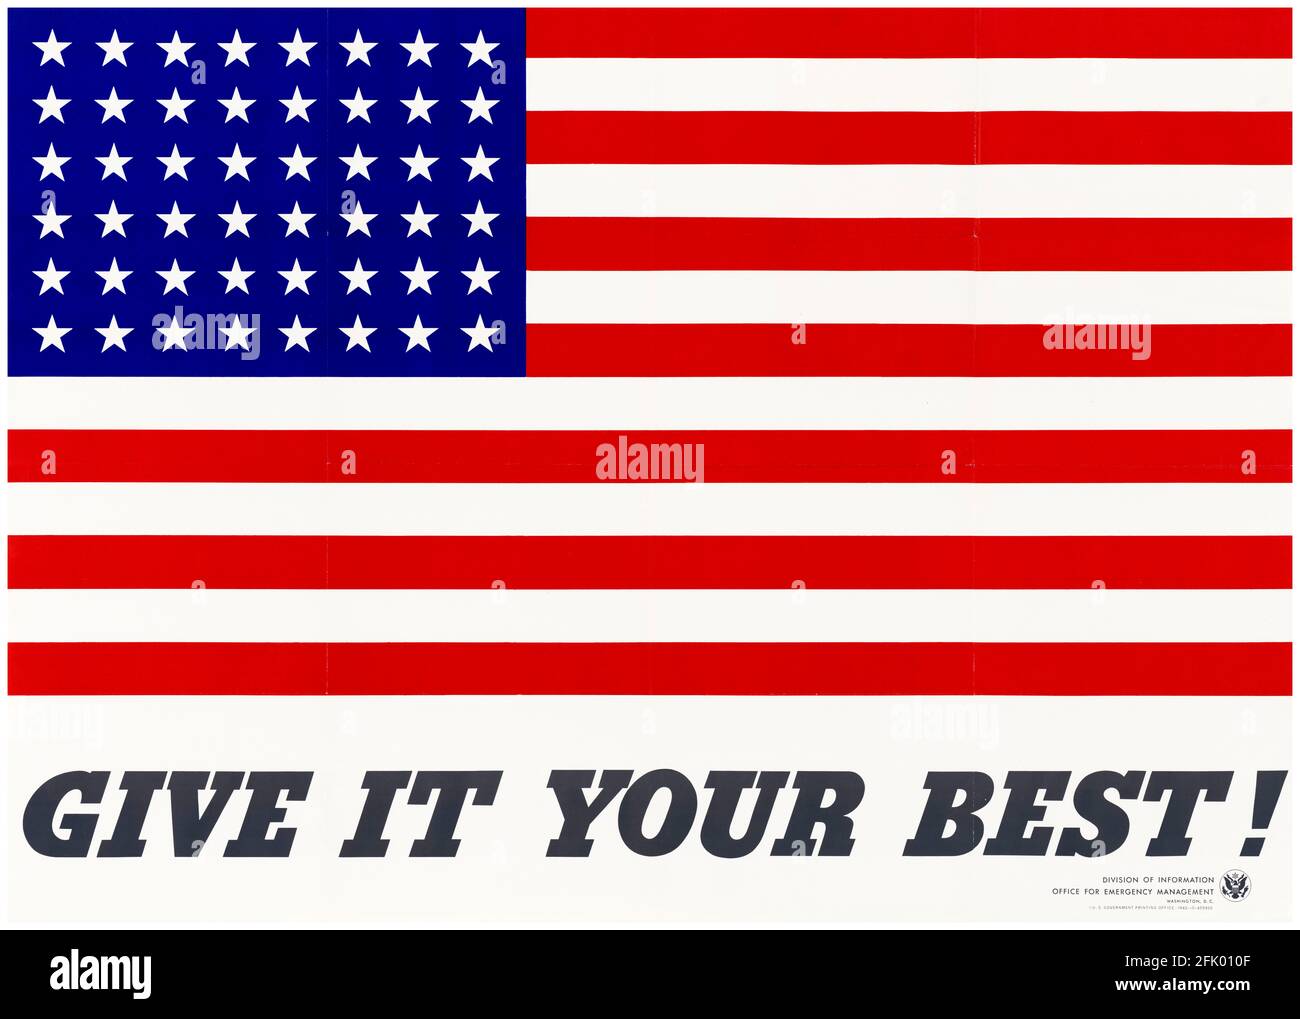 American, WW2 Motivational Poster, Give it Your Best!,(Stars and Stripes Flag), 1942-1945 Stock Photo